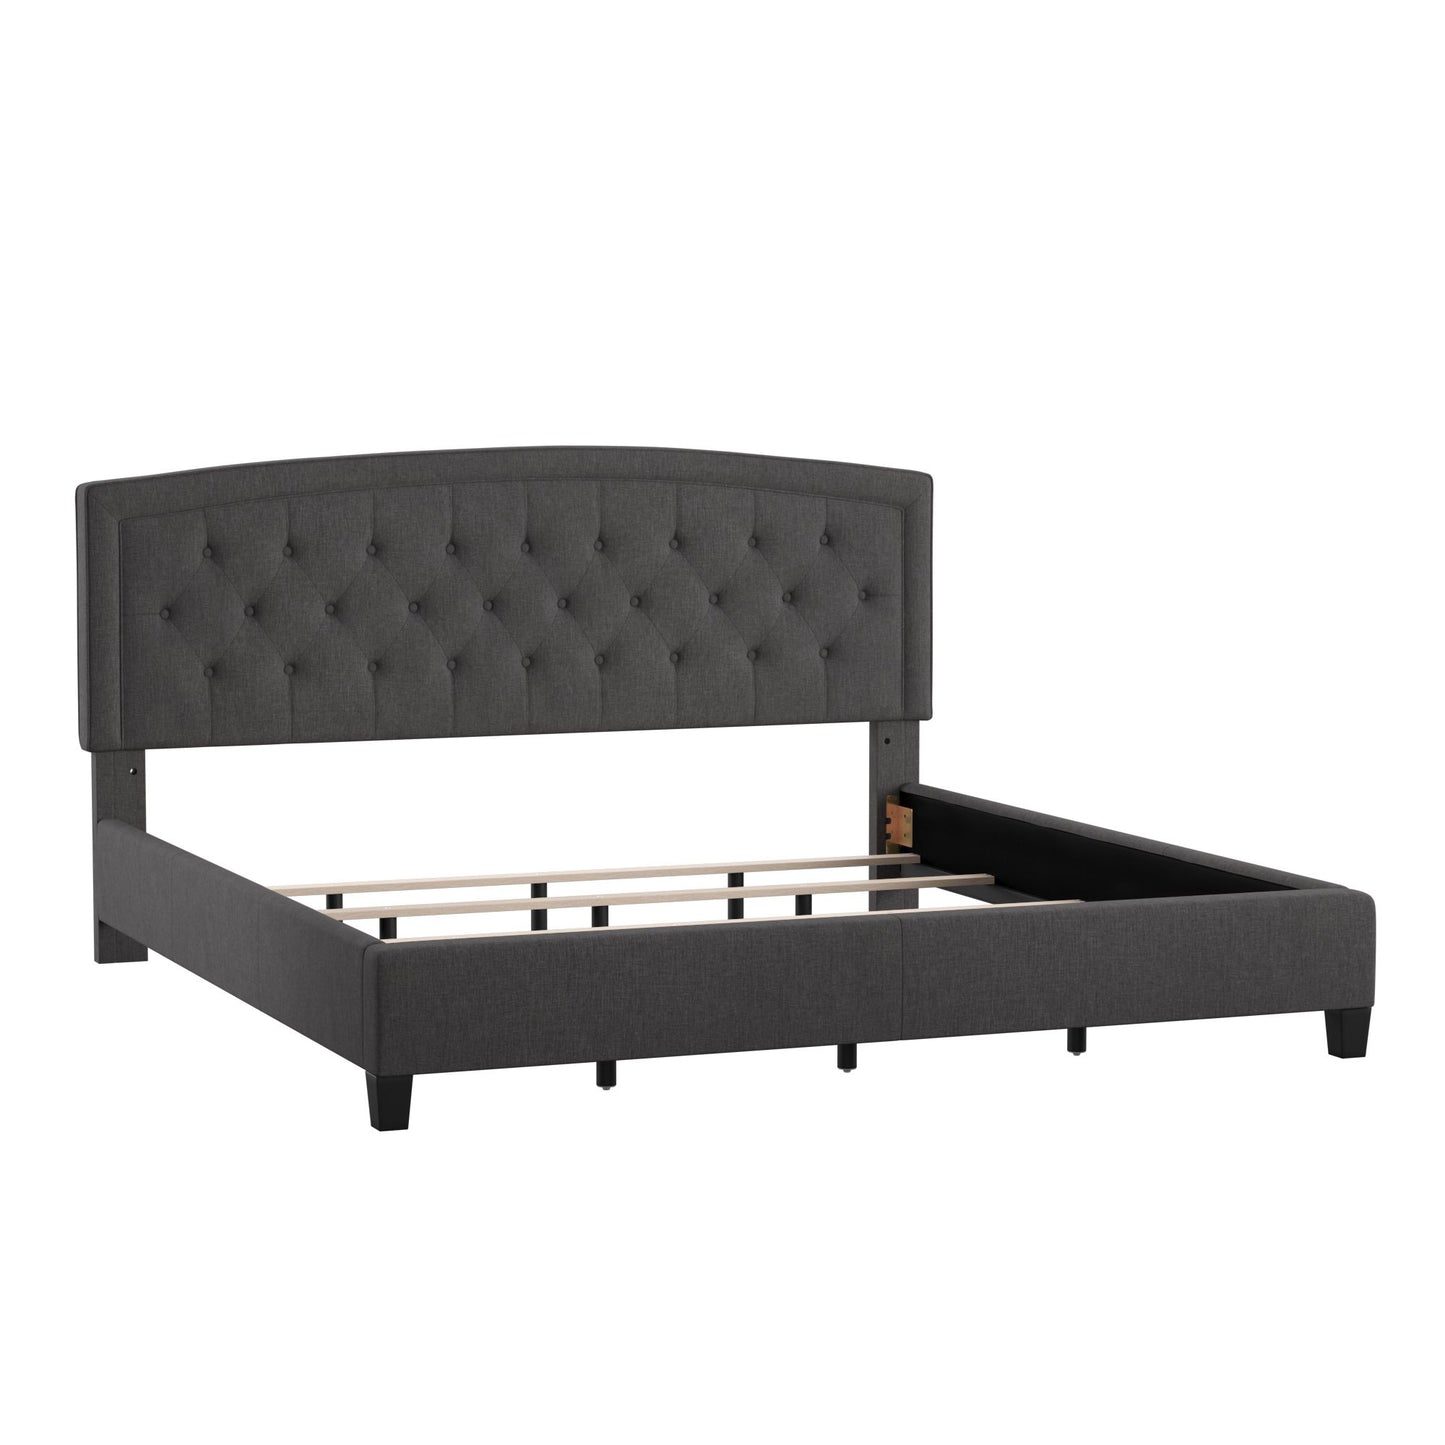 Adjustable Diamond-Tufted Arch-Back Bed - Charcoal, King